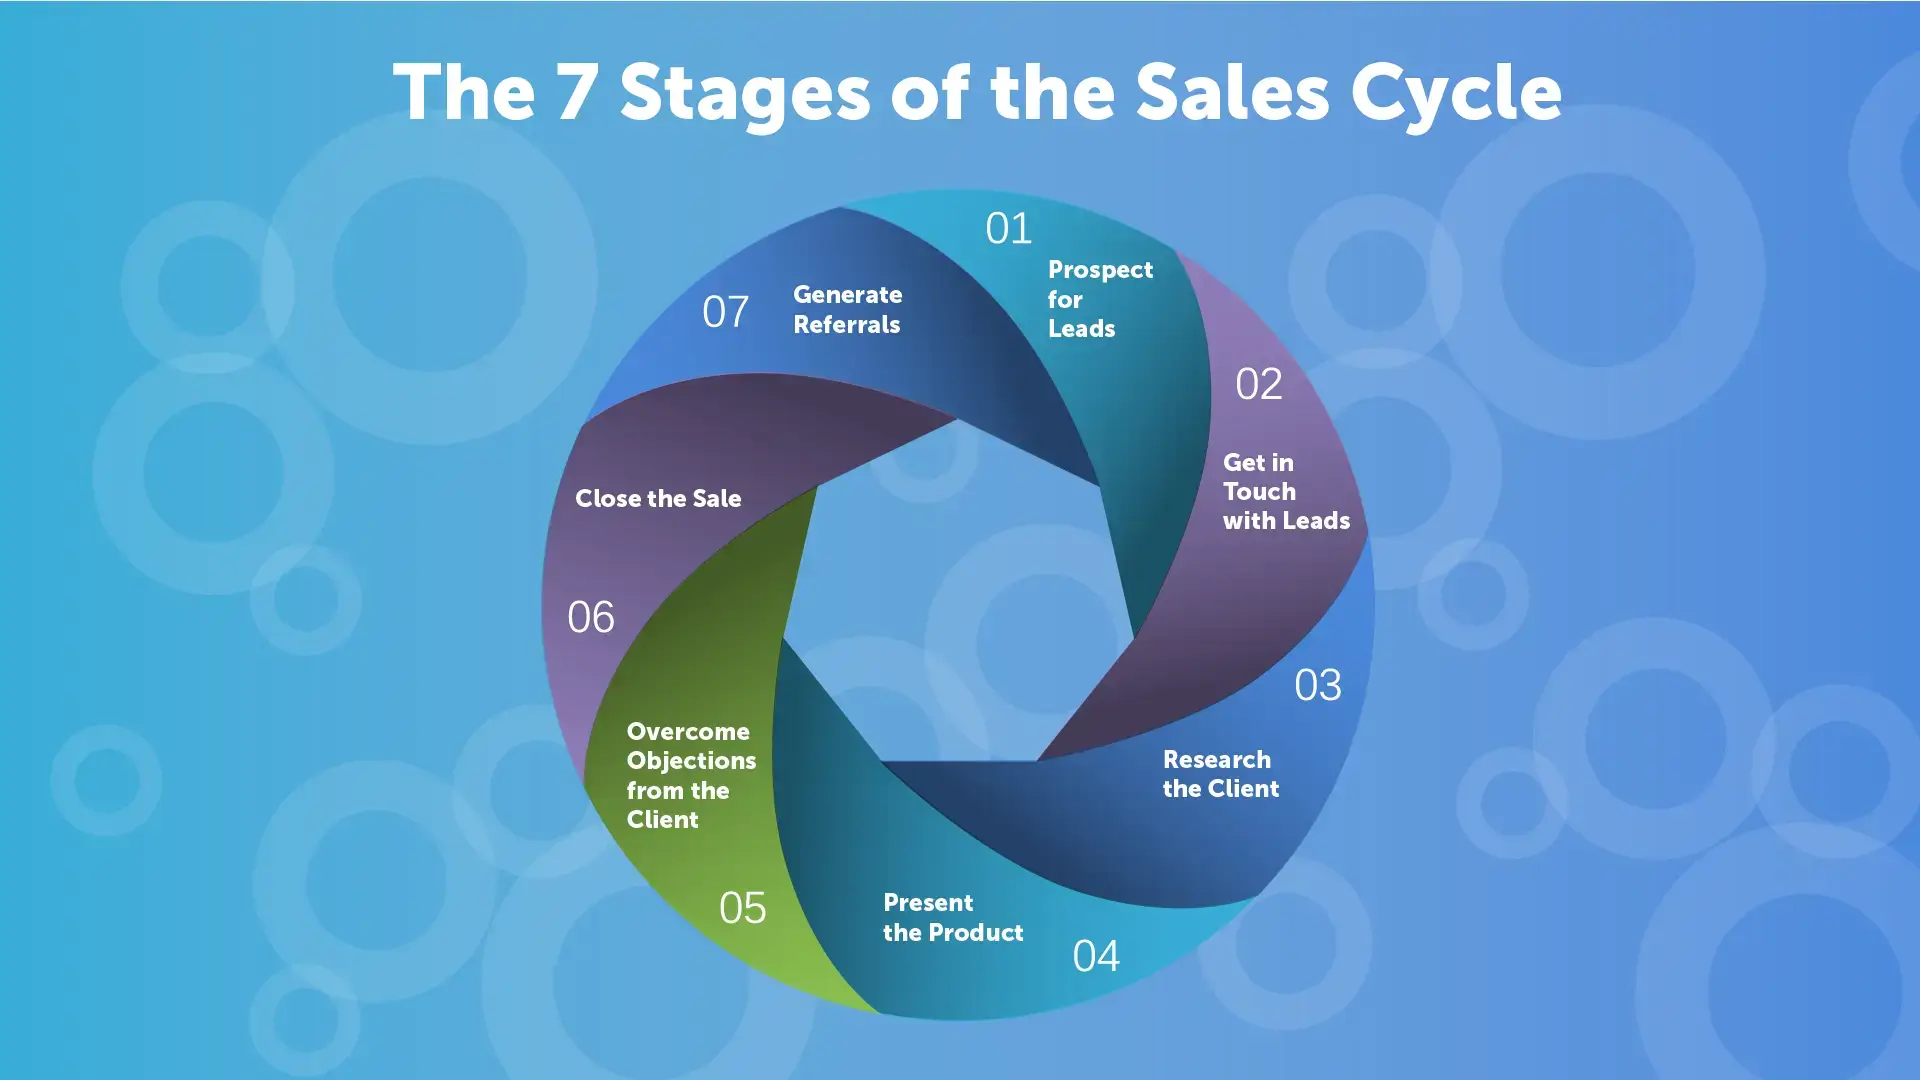 Cirrus Insight. Graphic image of the 7 parts of a sales cycle.